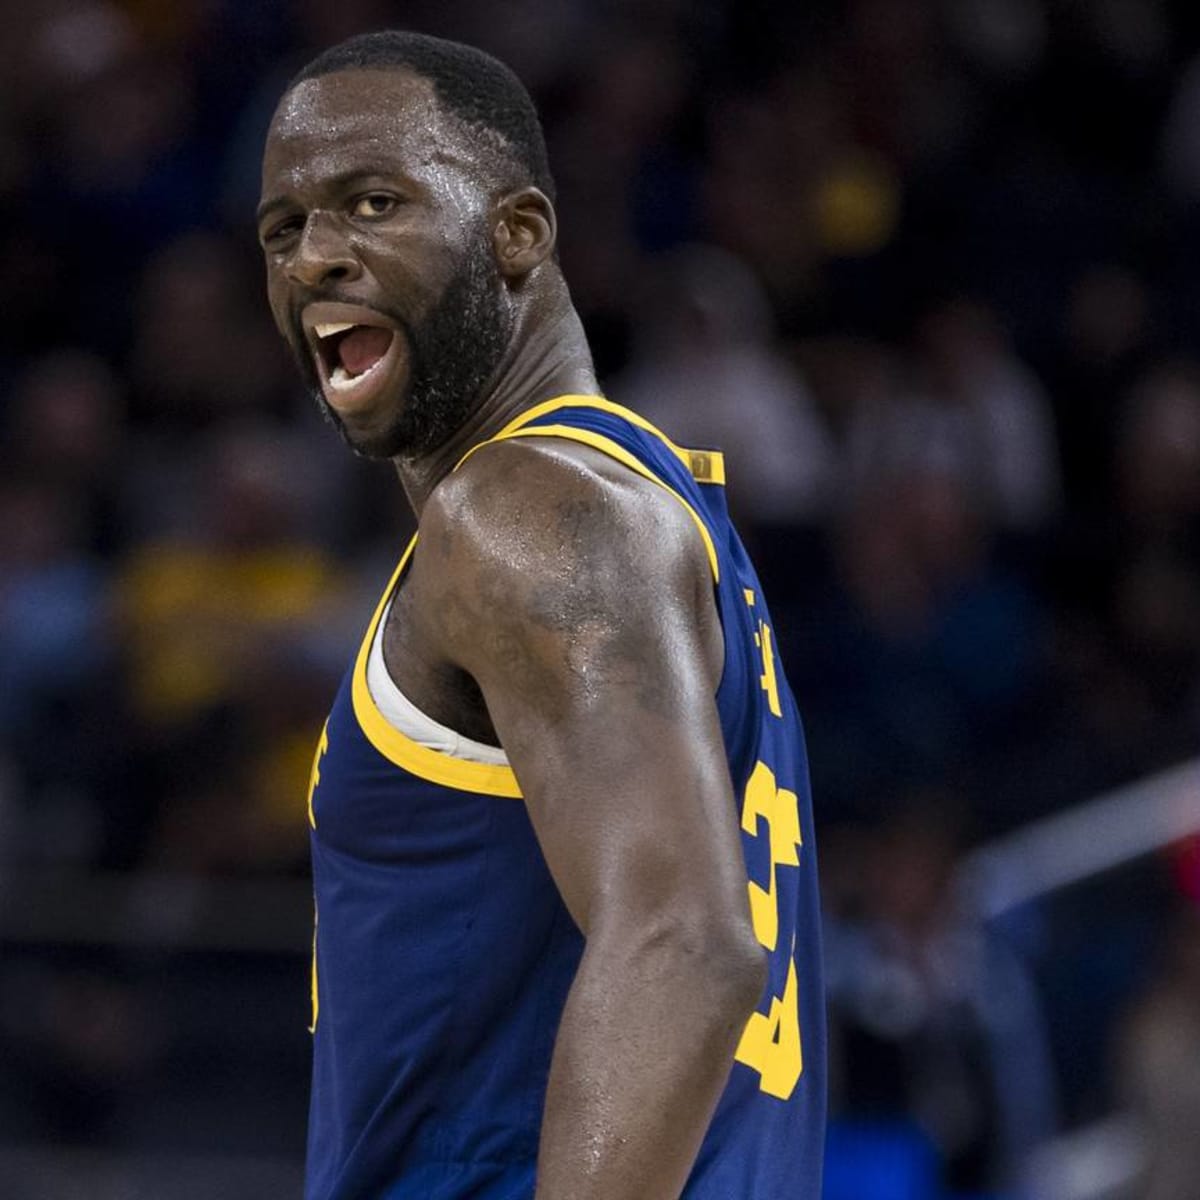 Draymond Green says NBA players are 'castrated' for seeking trades, NBA